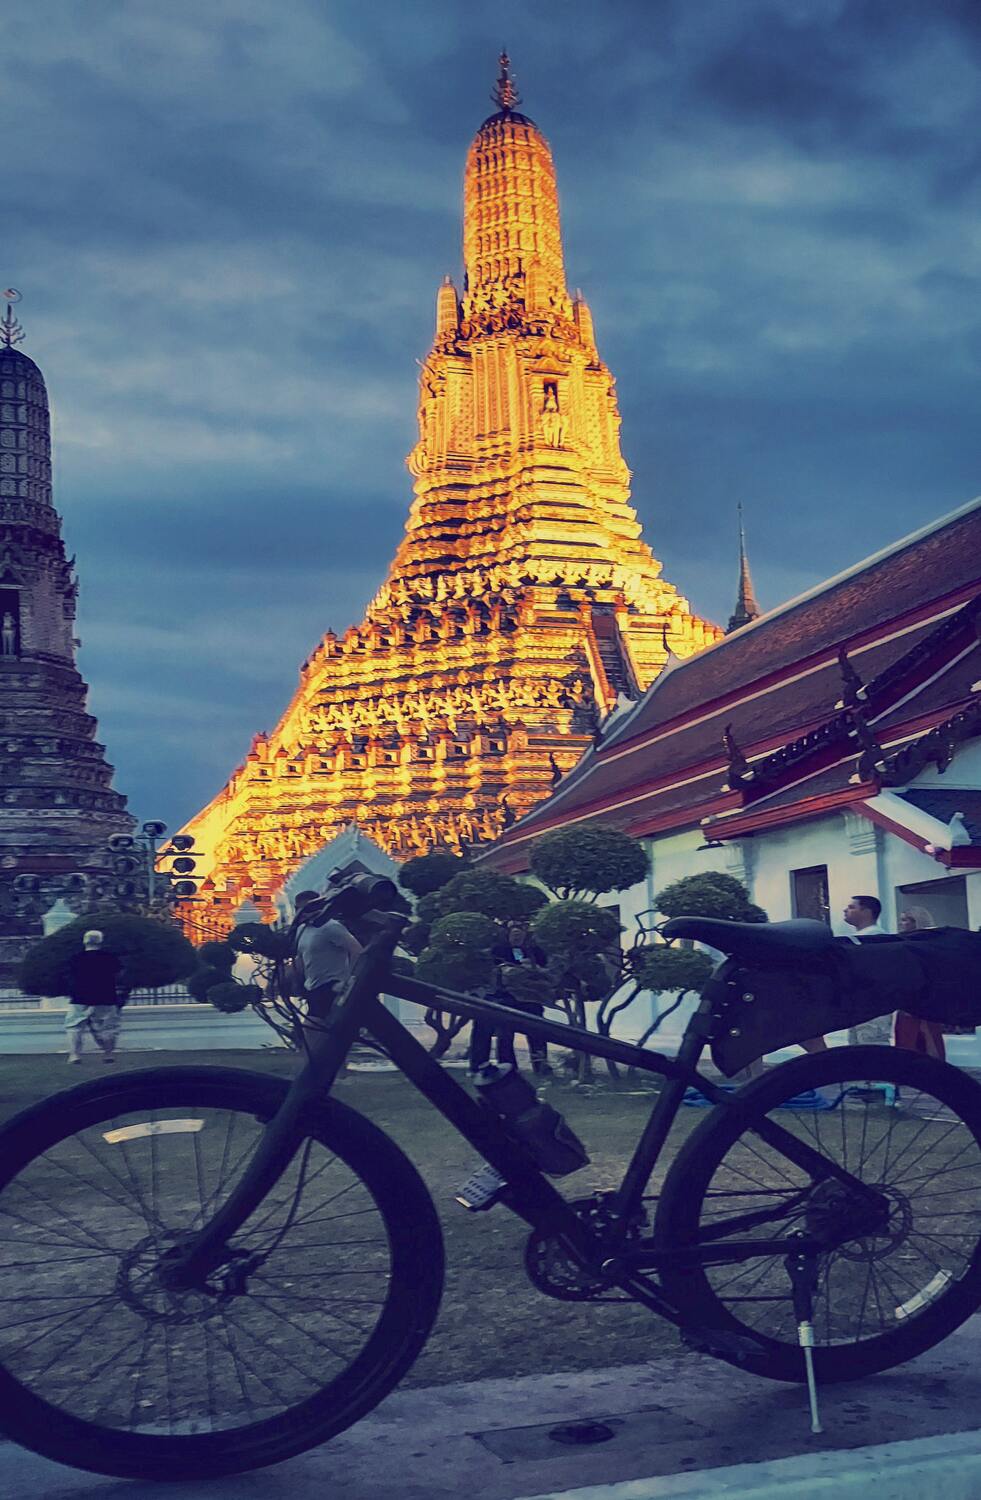 A vintage bicycle parked in front of a temple, with its reflection seen on the wet ground.